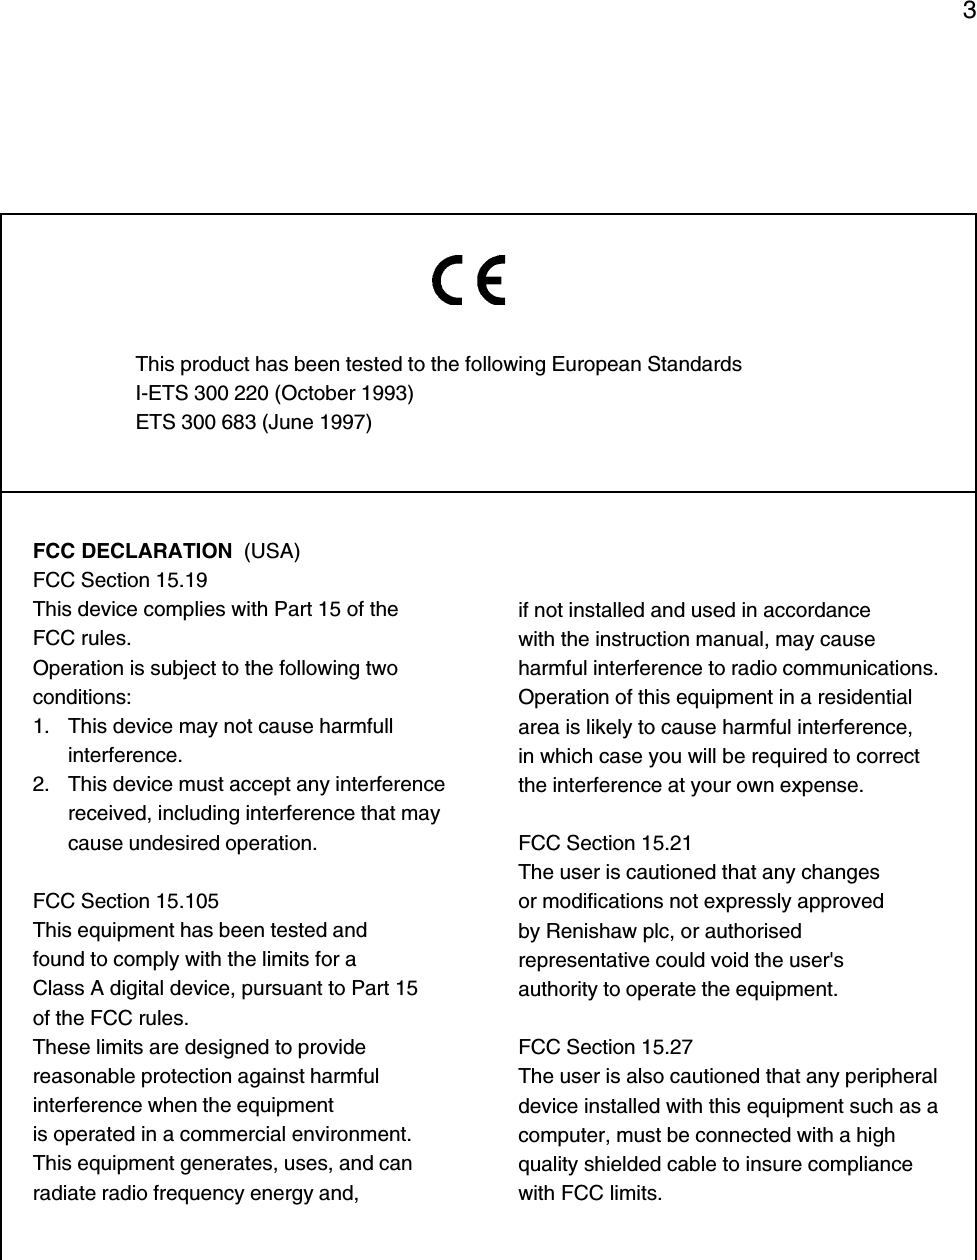 3FCC DECLARATION  (USA)FCC Section 15.19This device complies with Part 15 of theFCC rules.Operation is subject to the following twoconditions:1. This device may not cause harmfullinterference.2. This device must accept any interferencereceived, including interference that maycause undesired operation.FCC Section 15.105This equipment has been tested andfound to comply with the limits for aClass A digital device, pursuant to Part 15of the FCC rules.These limits are designed to providereasonable protection against harmfulinterference when the equipmentis operated in a commercial environment.This equipment generates, uses, and canradiate radio frequency energy and,This product has been tested to the following European StandardsI-ETS 300 220 (October 1993)ETS 300 683 (June 1997)if not installed and used in accordancewith the instruction manual, may causeharmful interference to radio communications.Operation of this equipment in a residentialarea is likely to cause harmful interference,in which case you will be required to correctthe interference at your own expense.FCC Section 15.21The user is cautioned that any changesor modifications not expressly approvedby Renishaw plc, or authorisedrepresentative could void the user&apos;sauthority to operate the equipment.FCC Section 15.27The user is also cautioned that any peripheraldevice installed with this equipment such as acomputer, must be connected with a highquality shielded cable to insure compliancewith FCC limits.